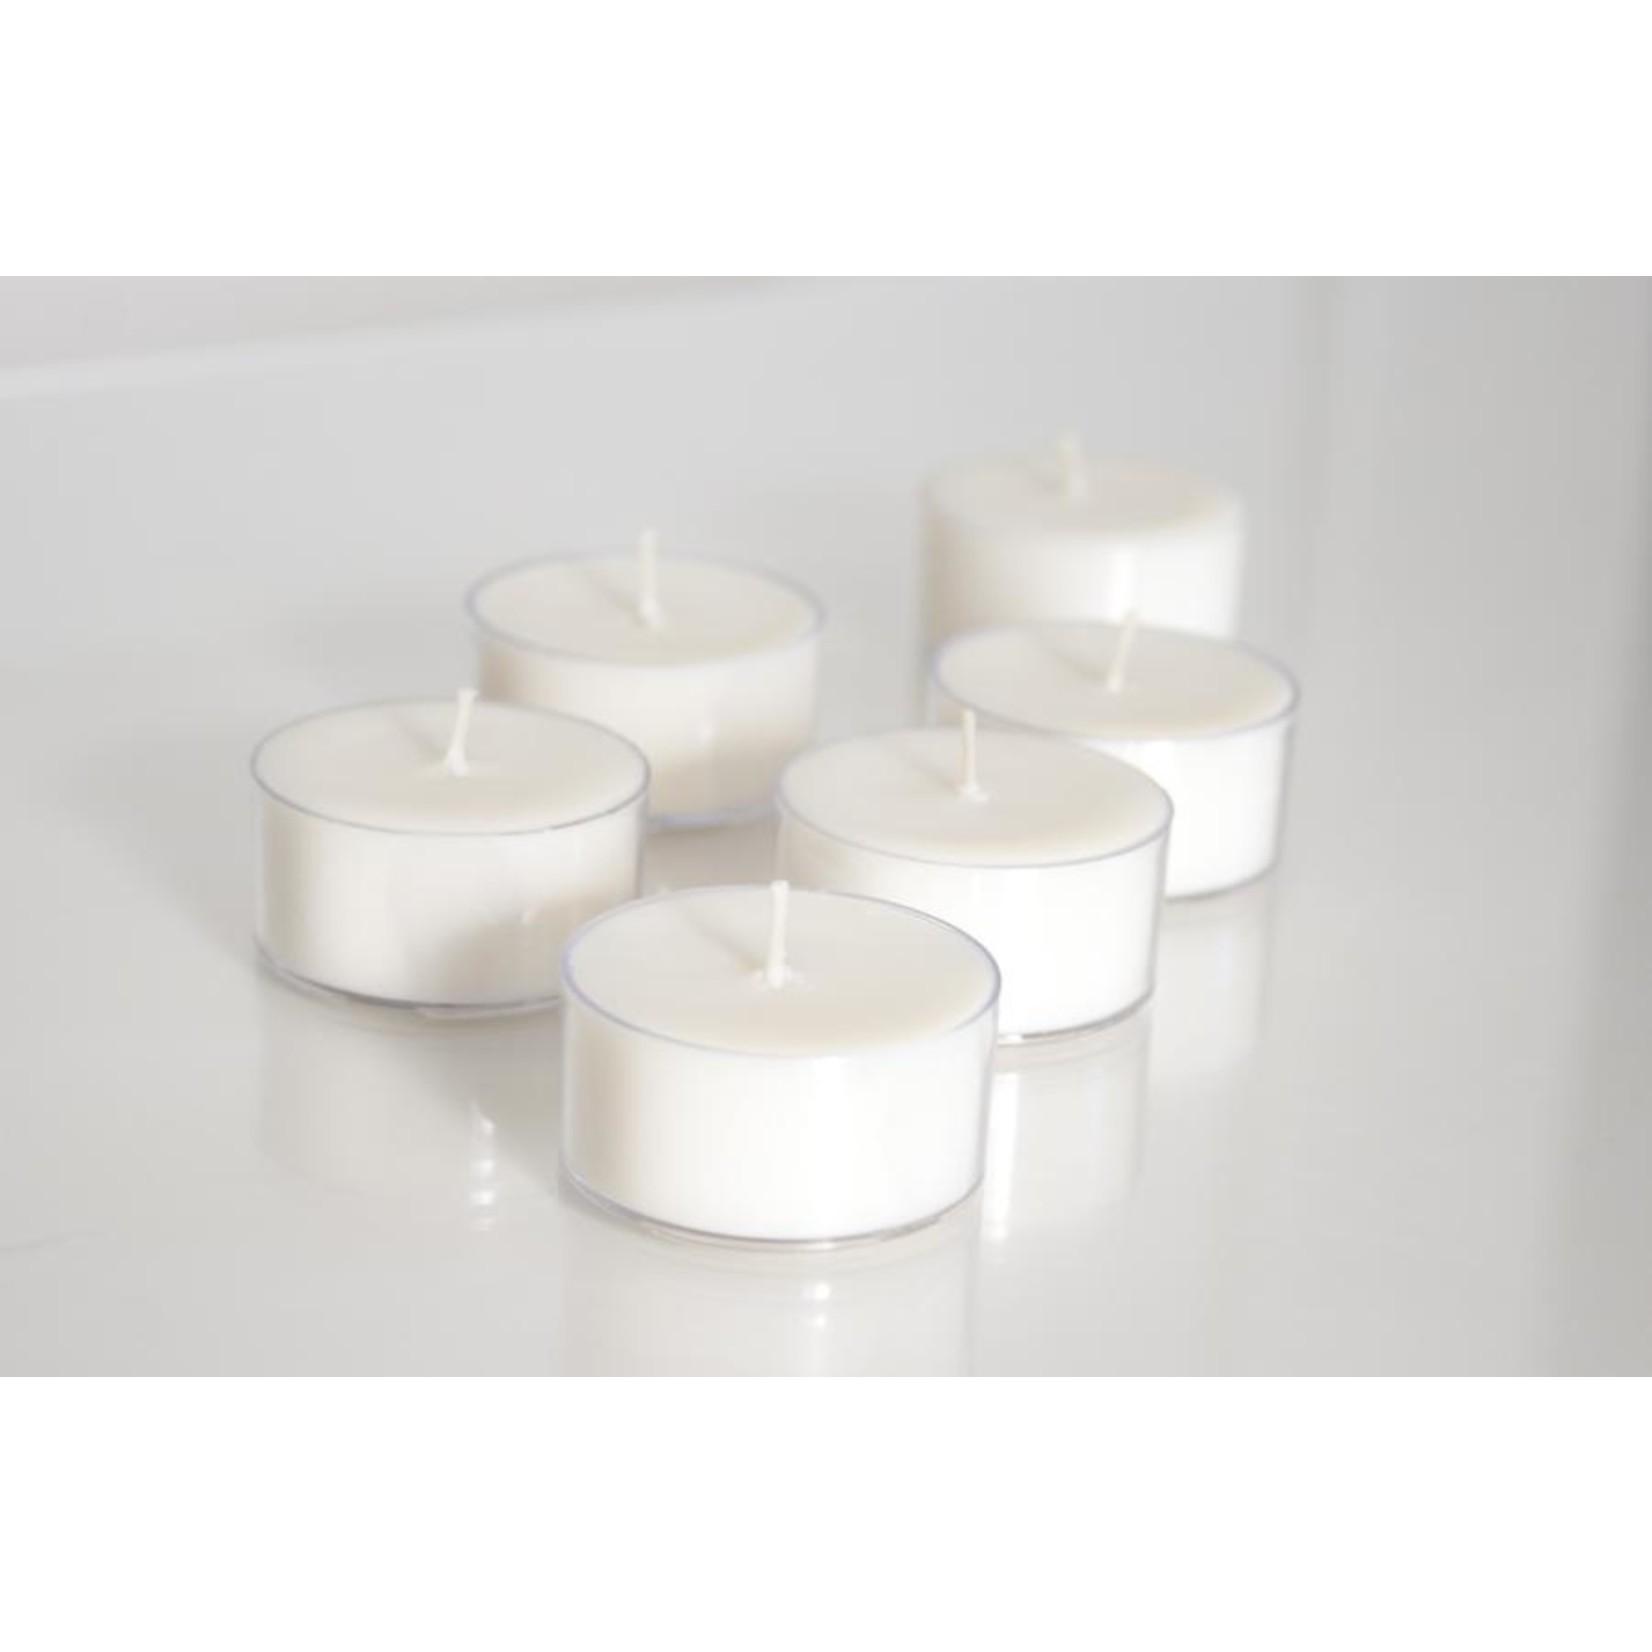 Penrose Candles Scented Tealights - Set of 8